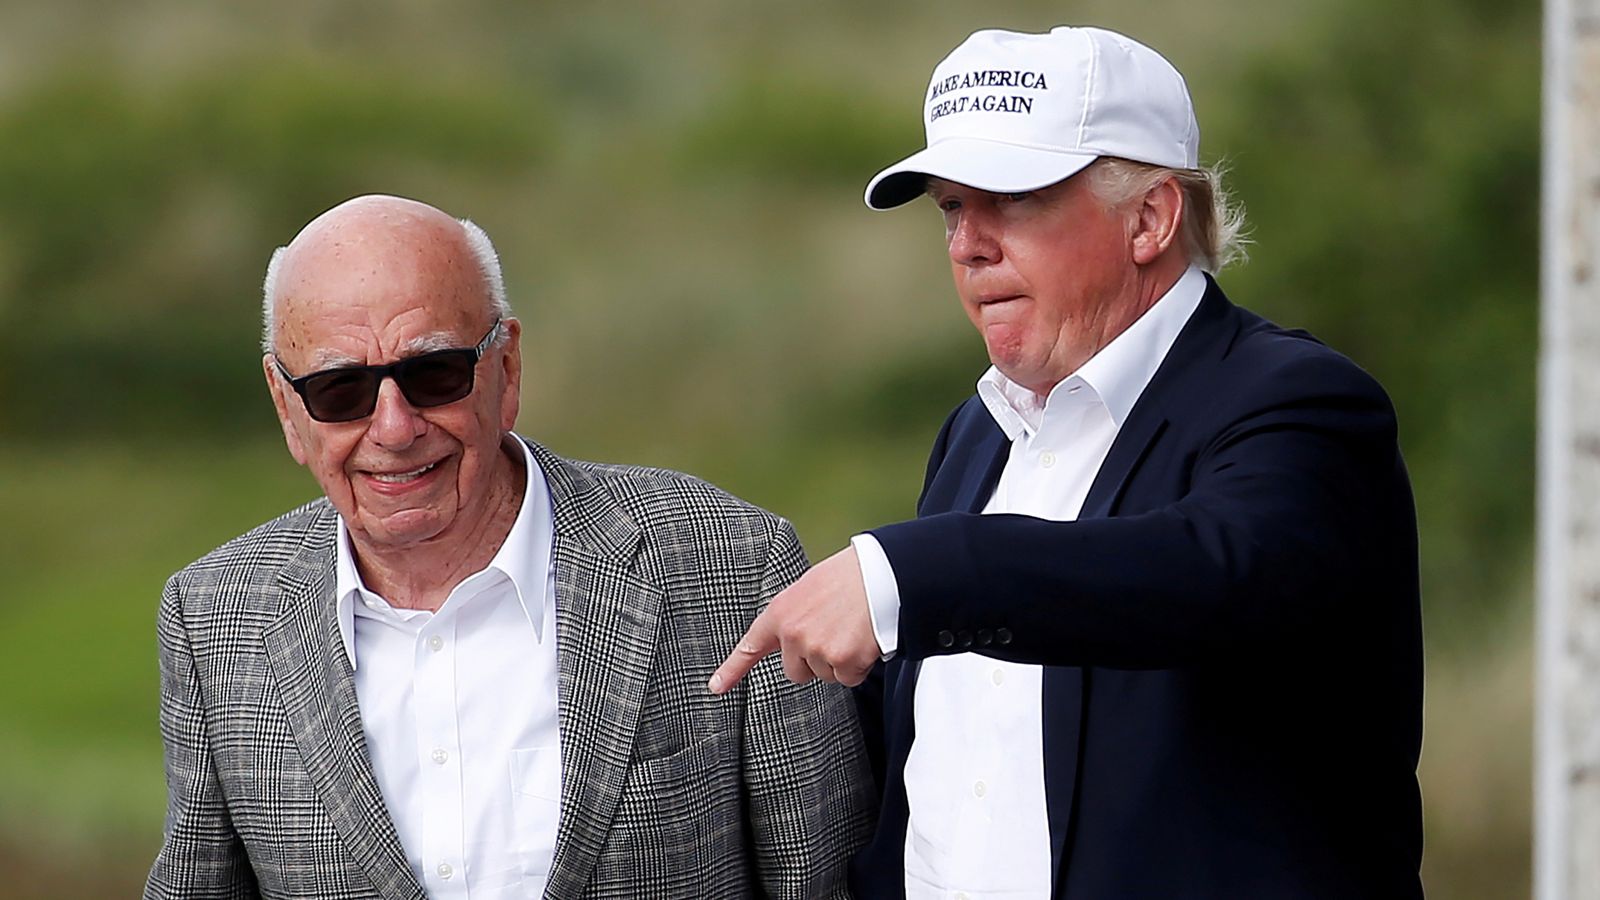 Murdoch admits some Fox News hosts 'endorsed' false claims made by Trump about 2020 election being stolen